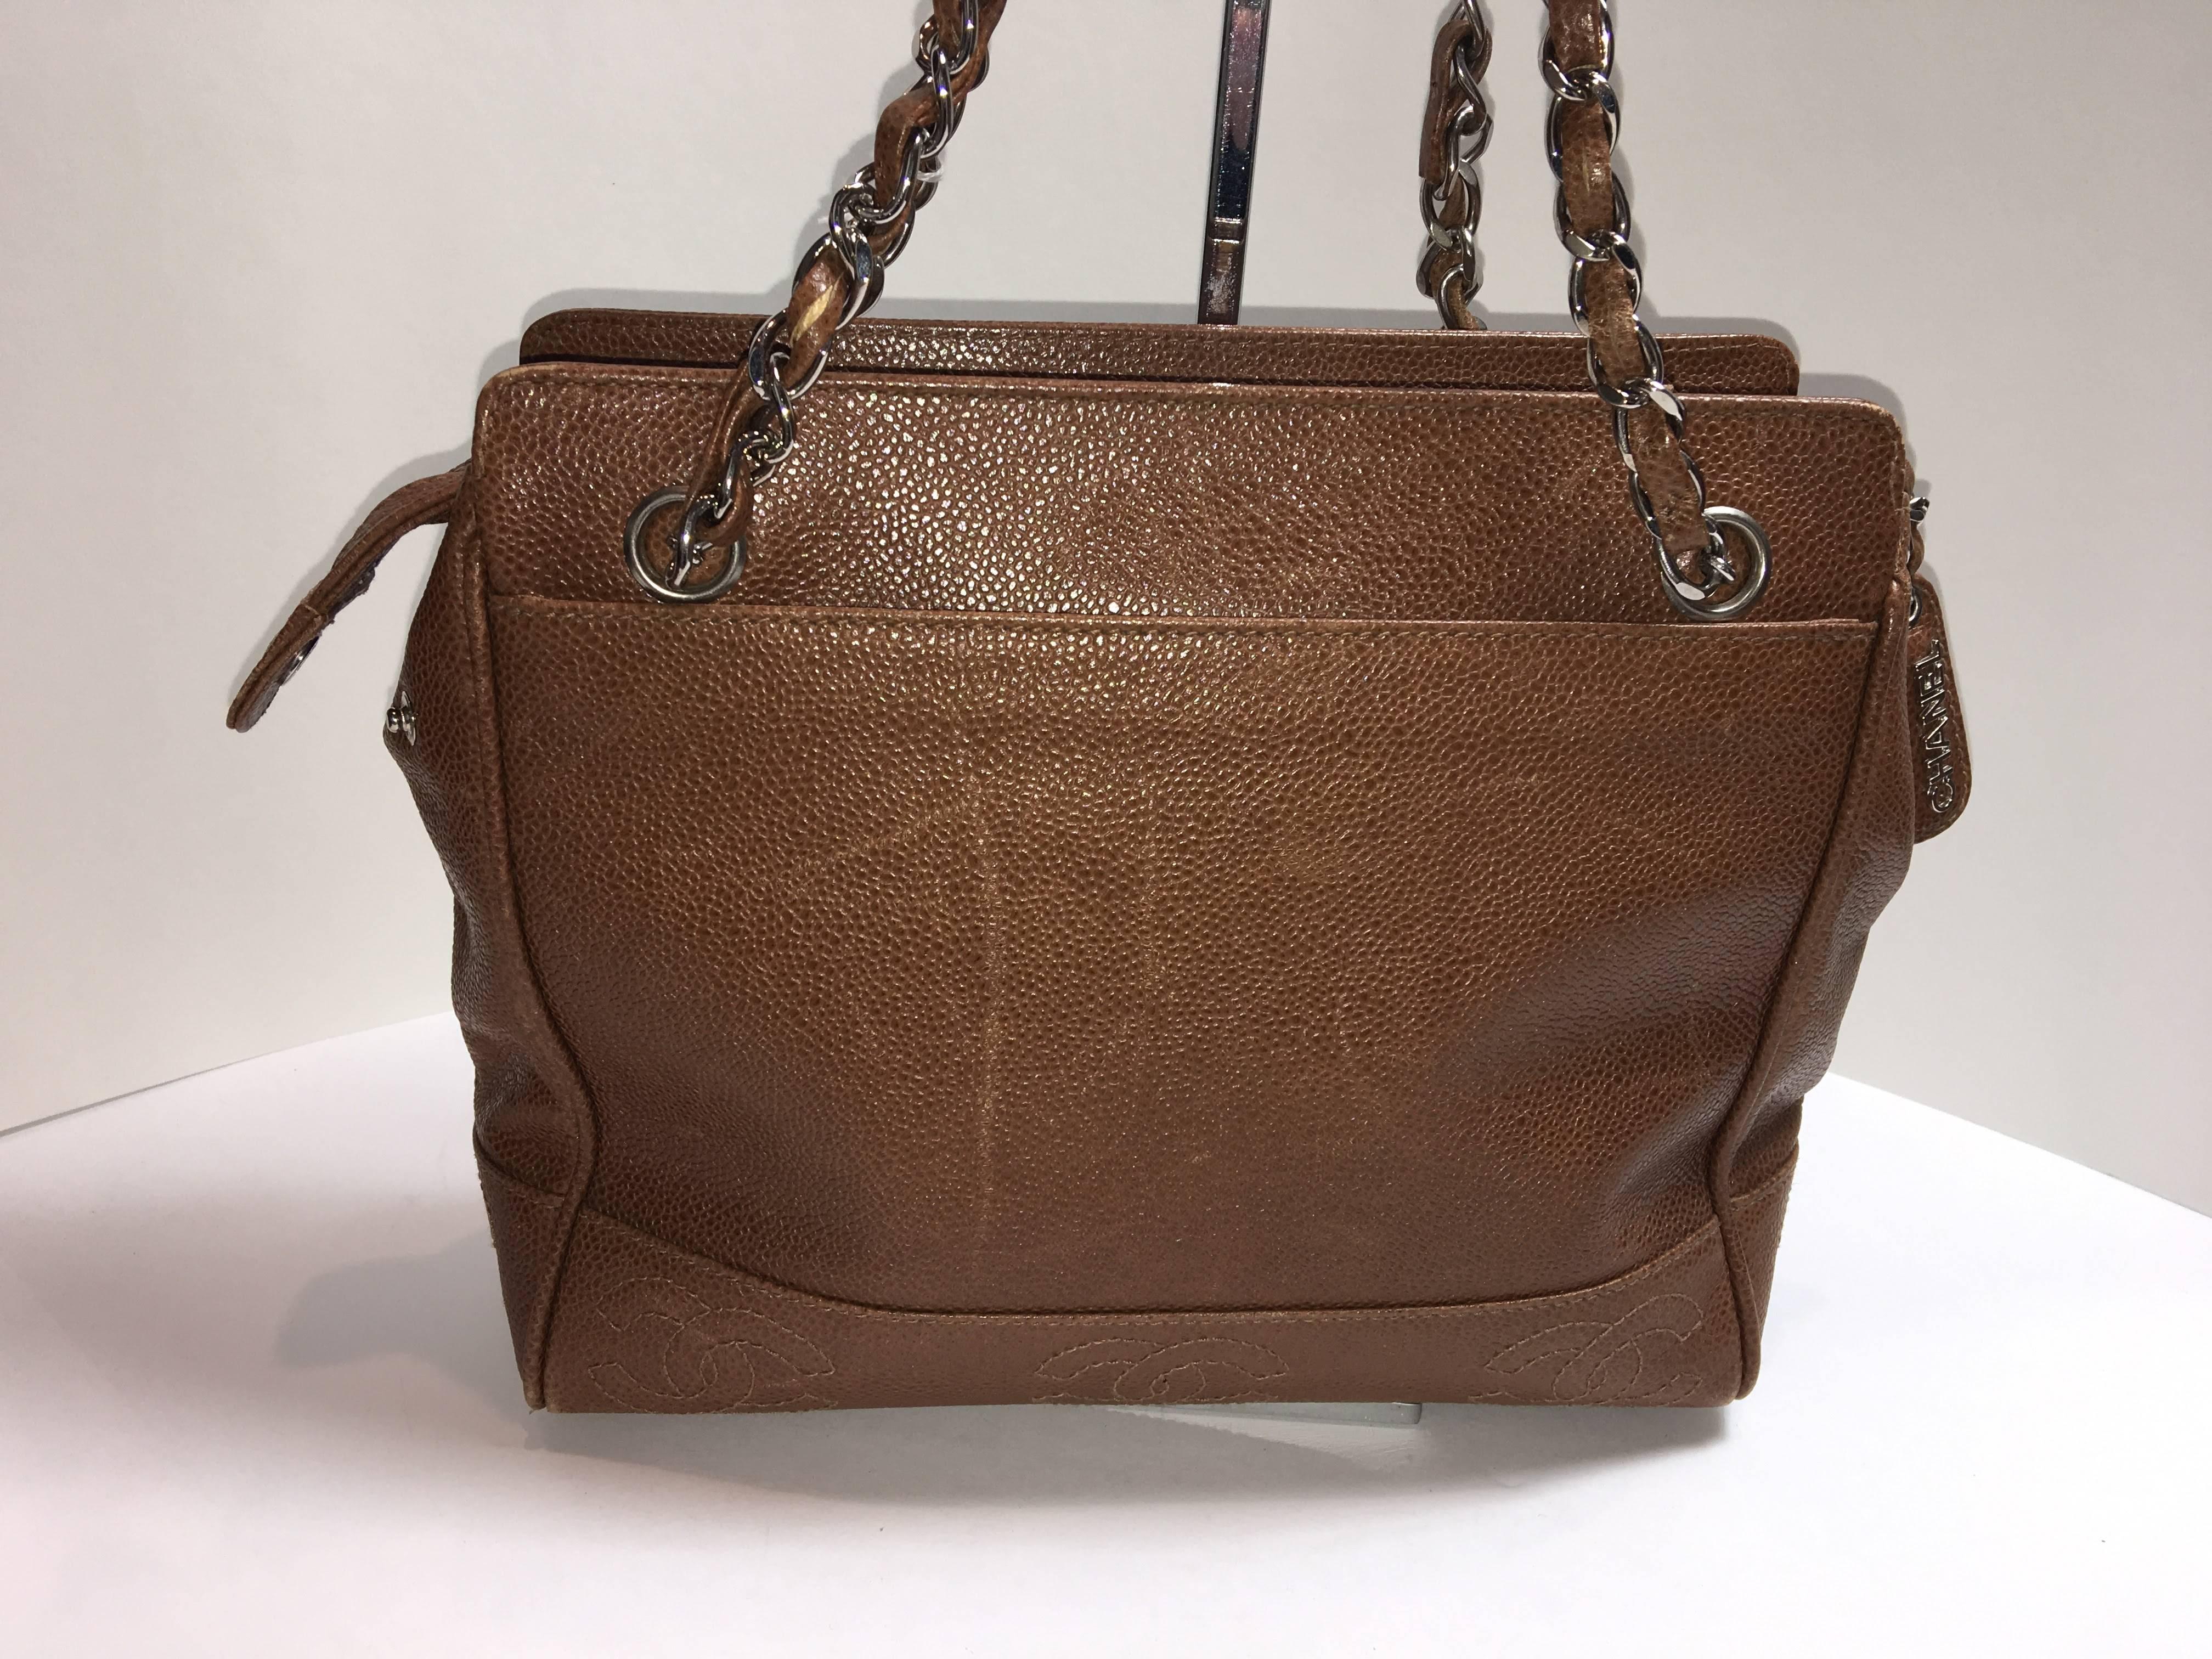 Vintage Chanel Camel Pebbled Leather Handbag. Double Strap tote with CCs at trim and gold hardware. 